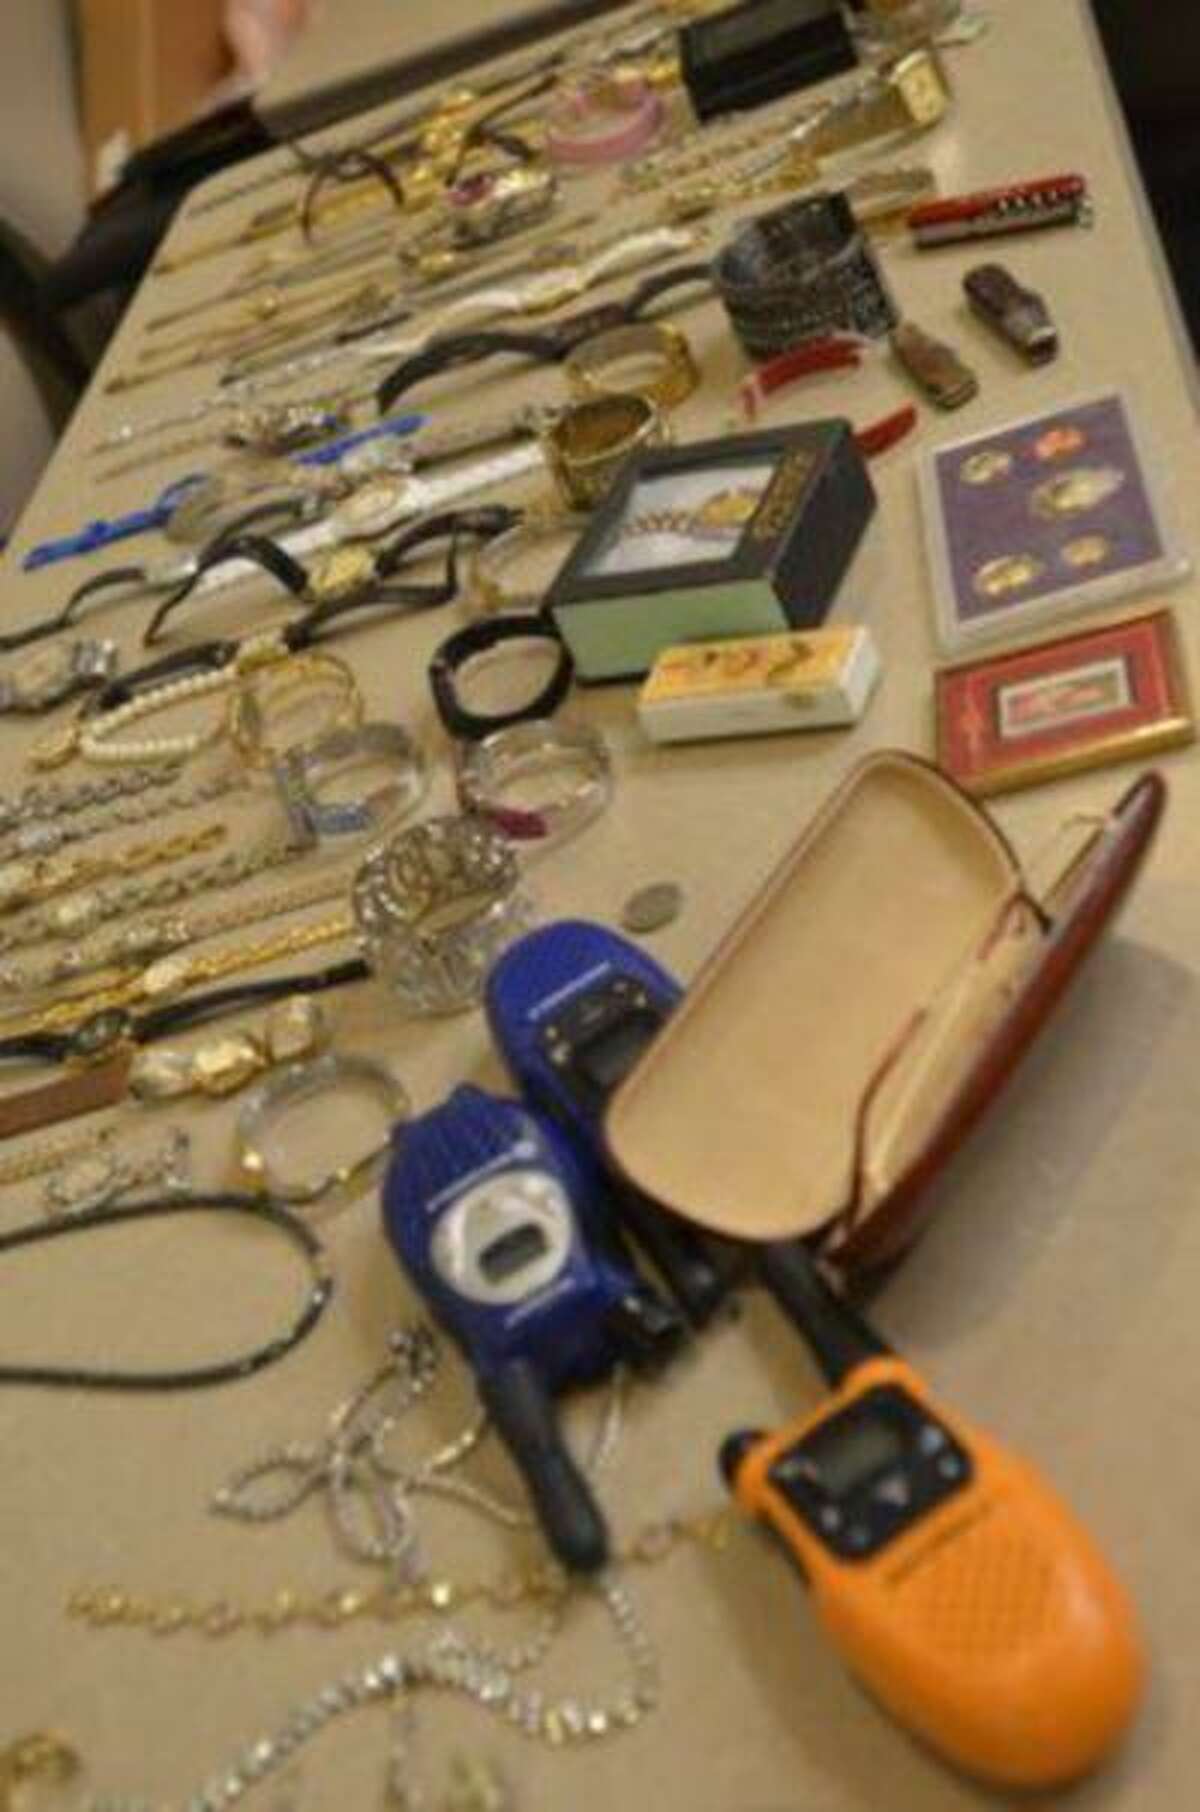 Items confiscated from the home of Todd Lloyd Griffin, who is accused of robbing people while they were attending funerals.